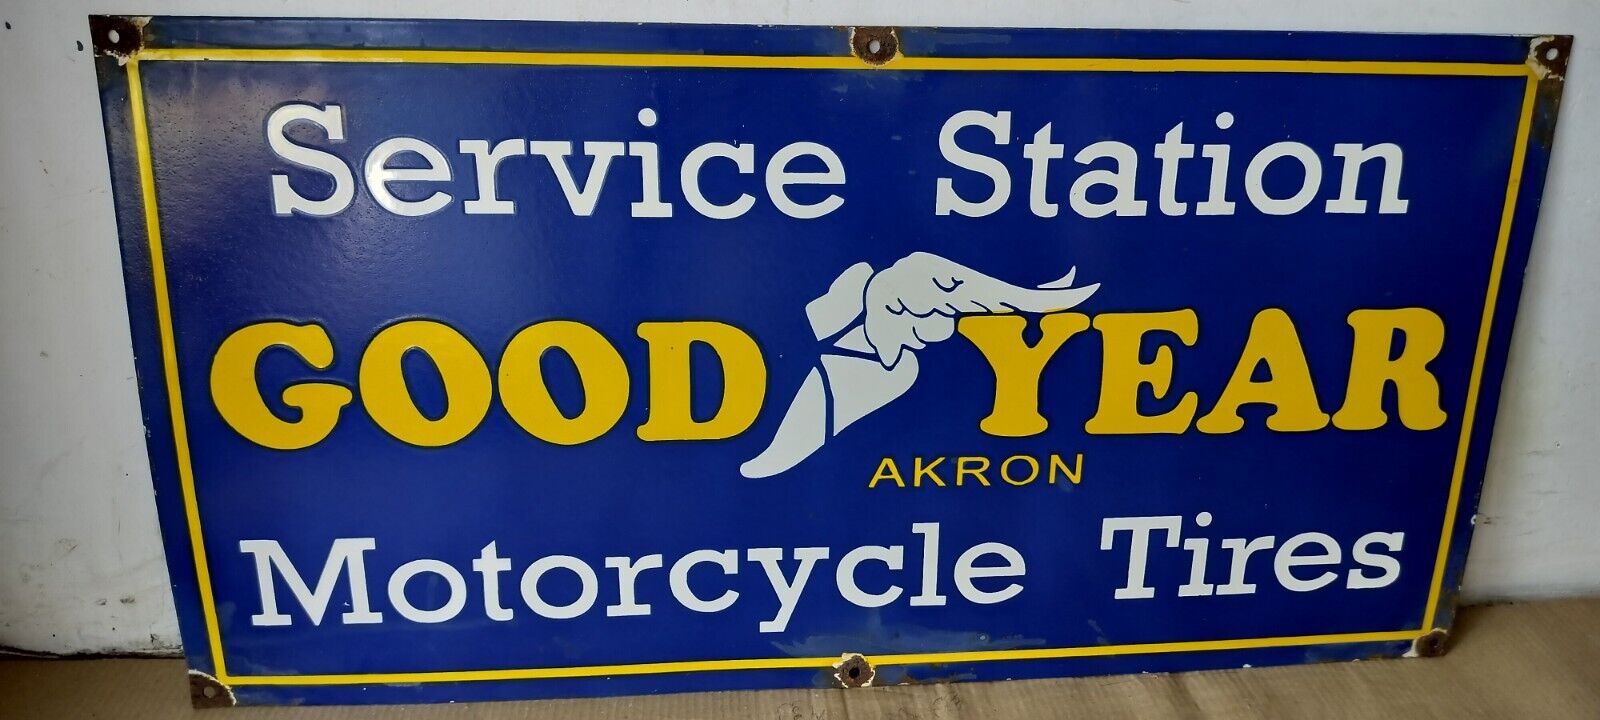 Good Year  Motorcycle Tires Tires Porcelain Enamel Sign  36 x 18 Inches